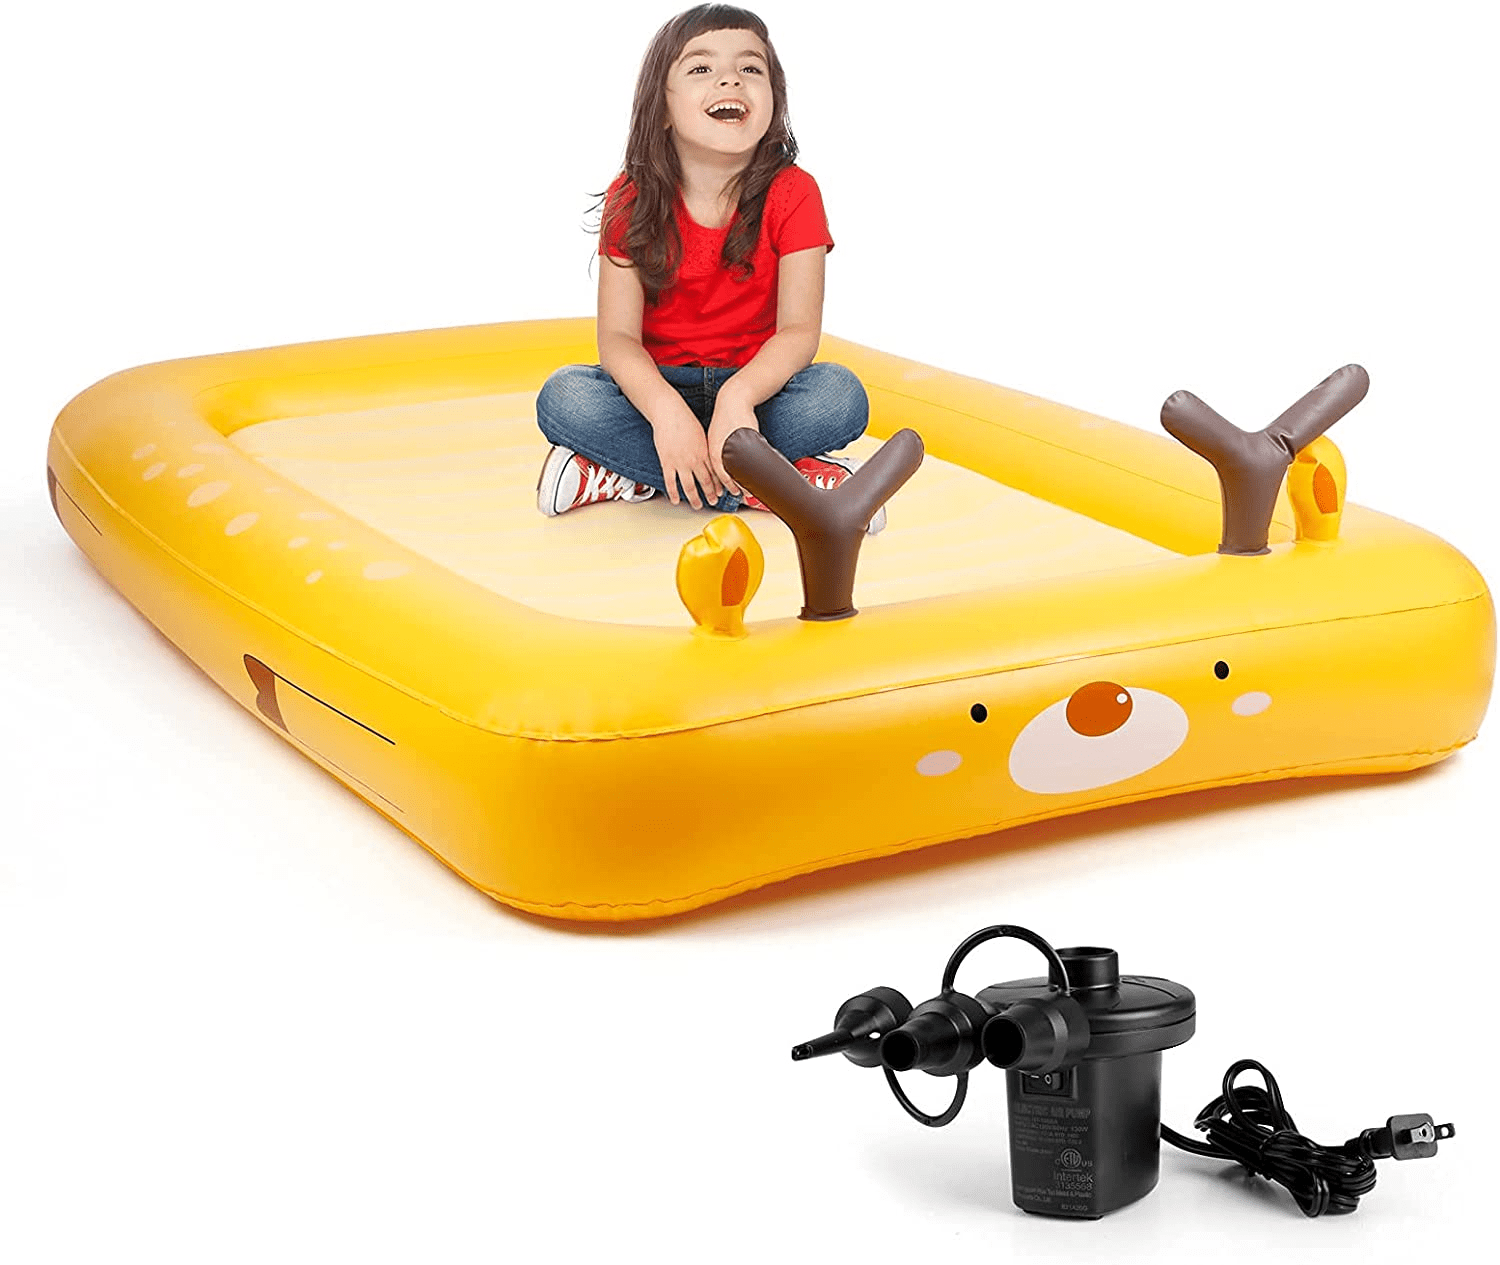 Kids Size Sleeping Air Mattress Travel Inflatable Bed Airbed Outdoor Camping 